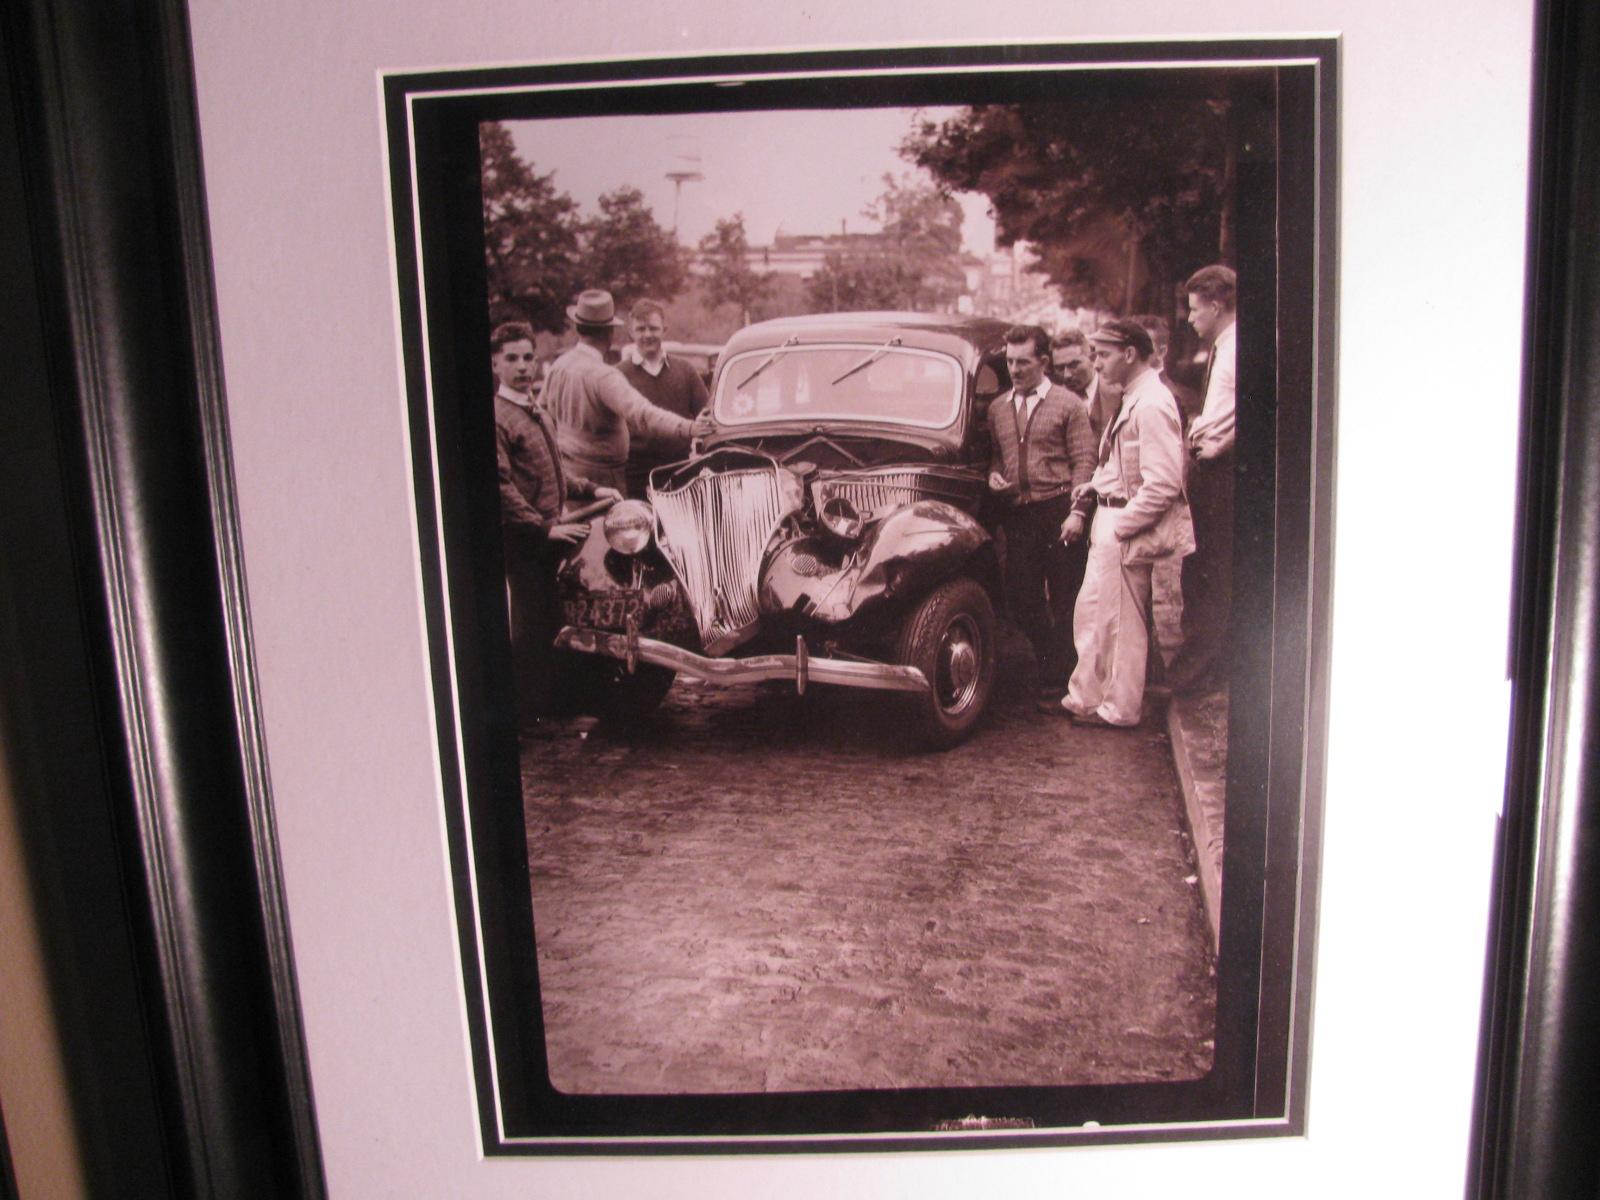 North American New Jersey c1932 Car Crash Photo with Nearby Onlookers in 1932 Garb For Sale